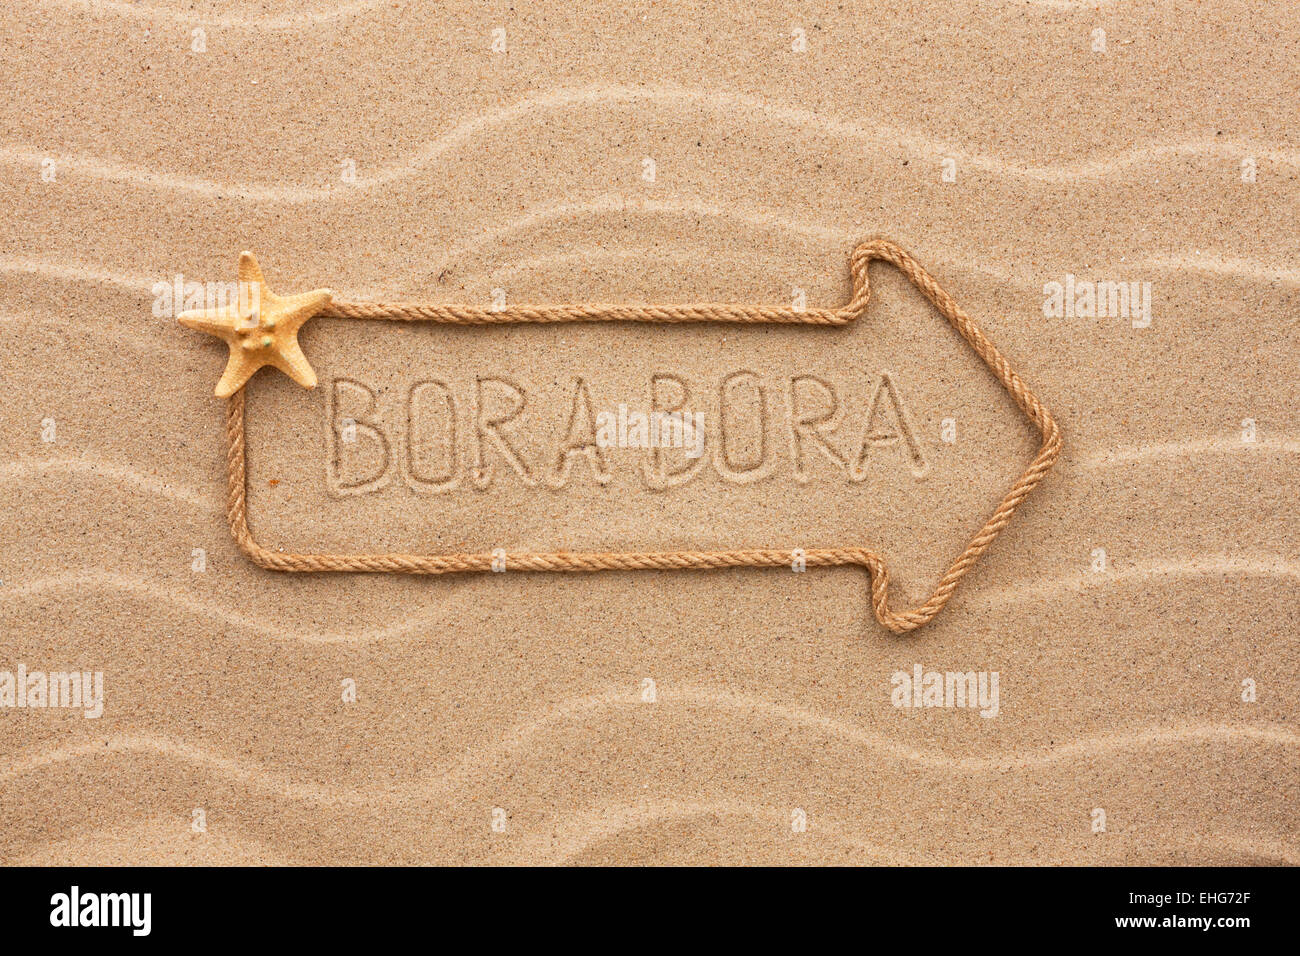 Arrow made of rope and sea shells with the word Bora Bora on the sand, as background Stock Photo